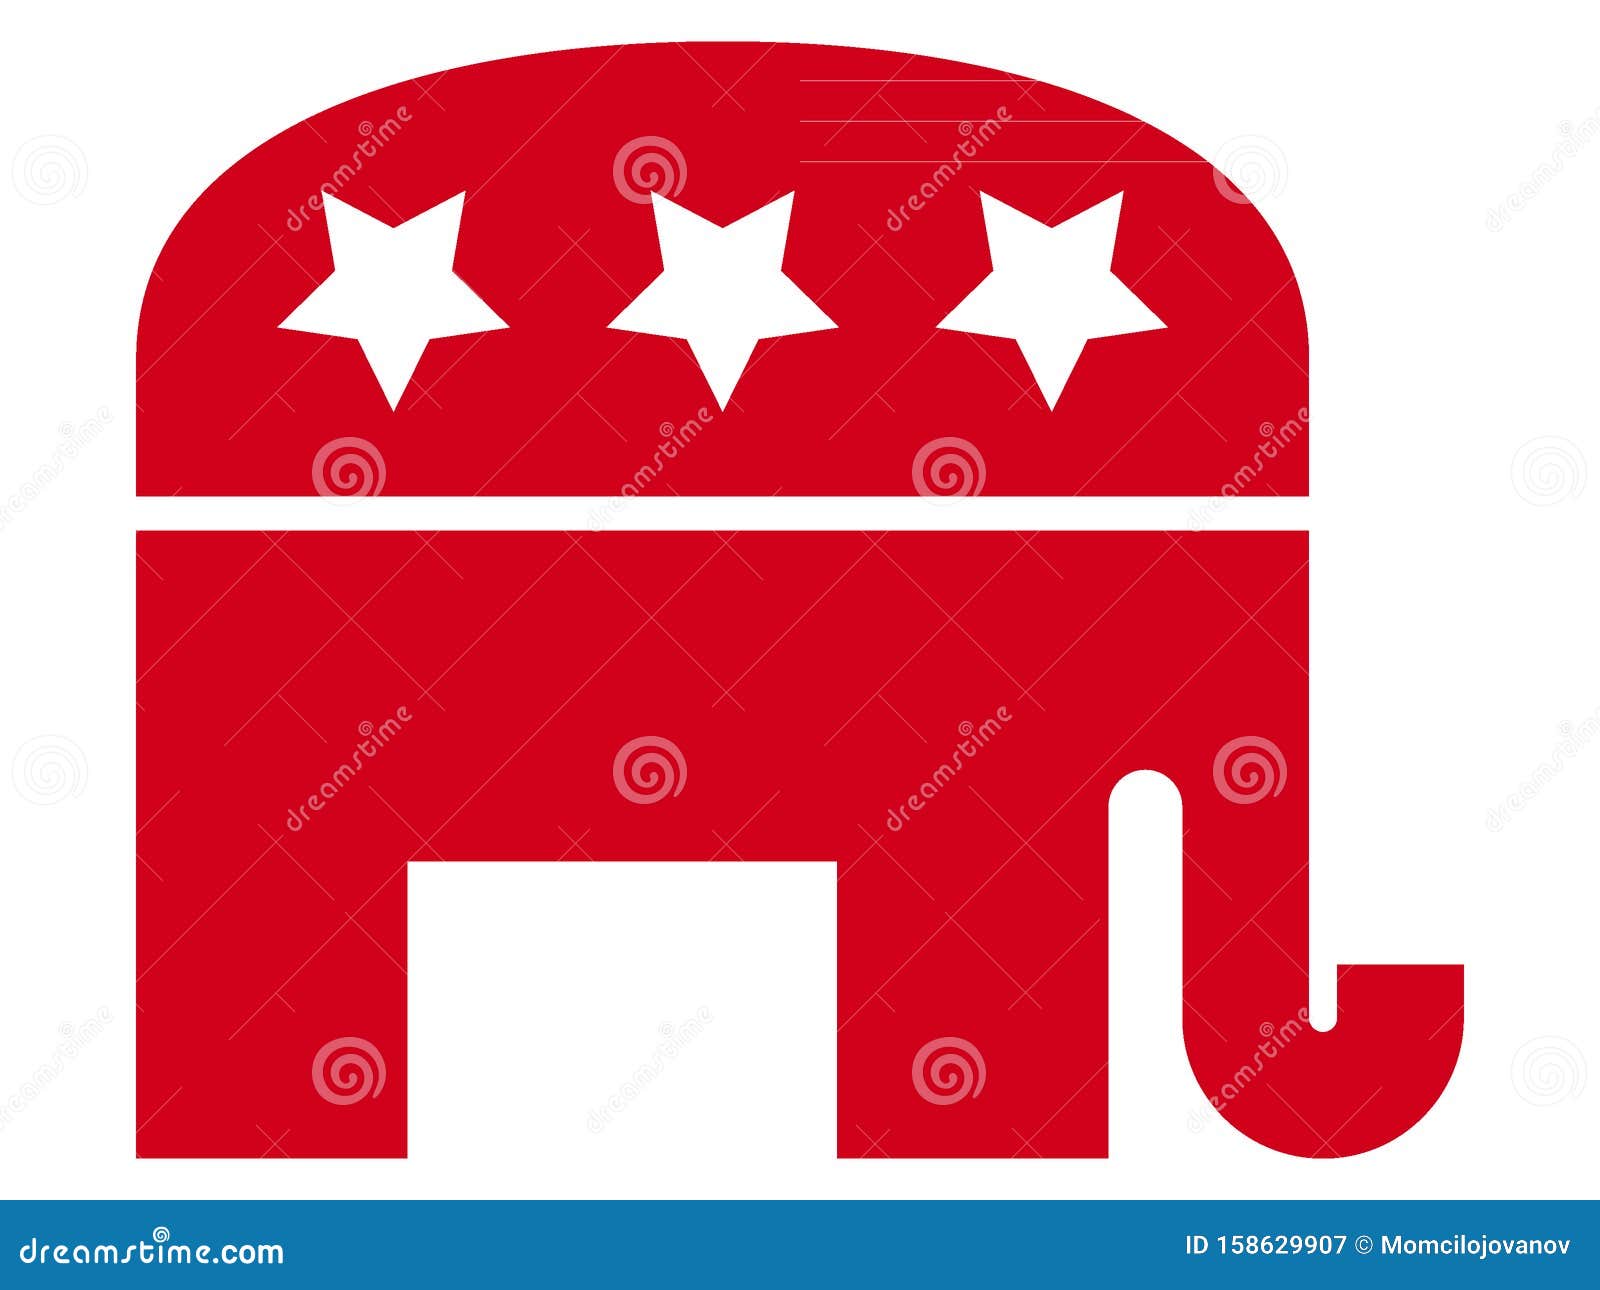 Red Symbol of USA Republican Editorial Photography Illustration flag, independent: 158629907